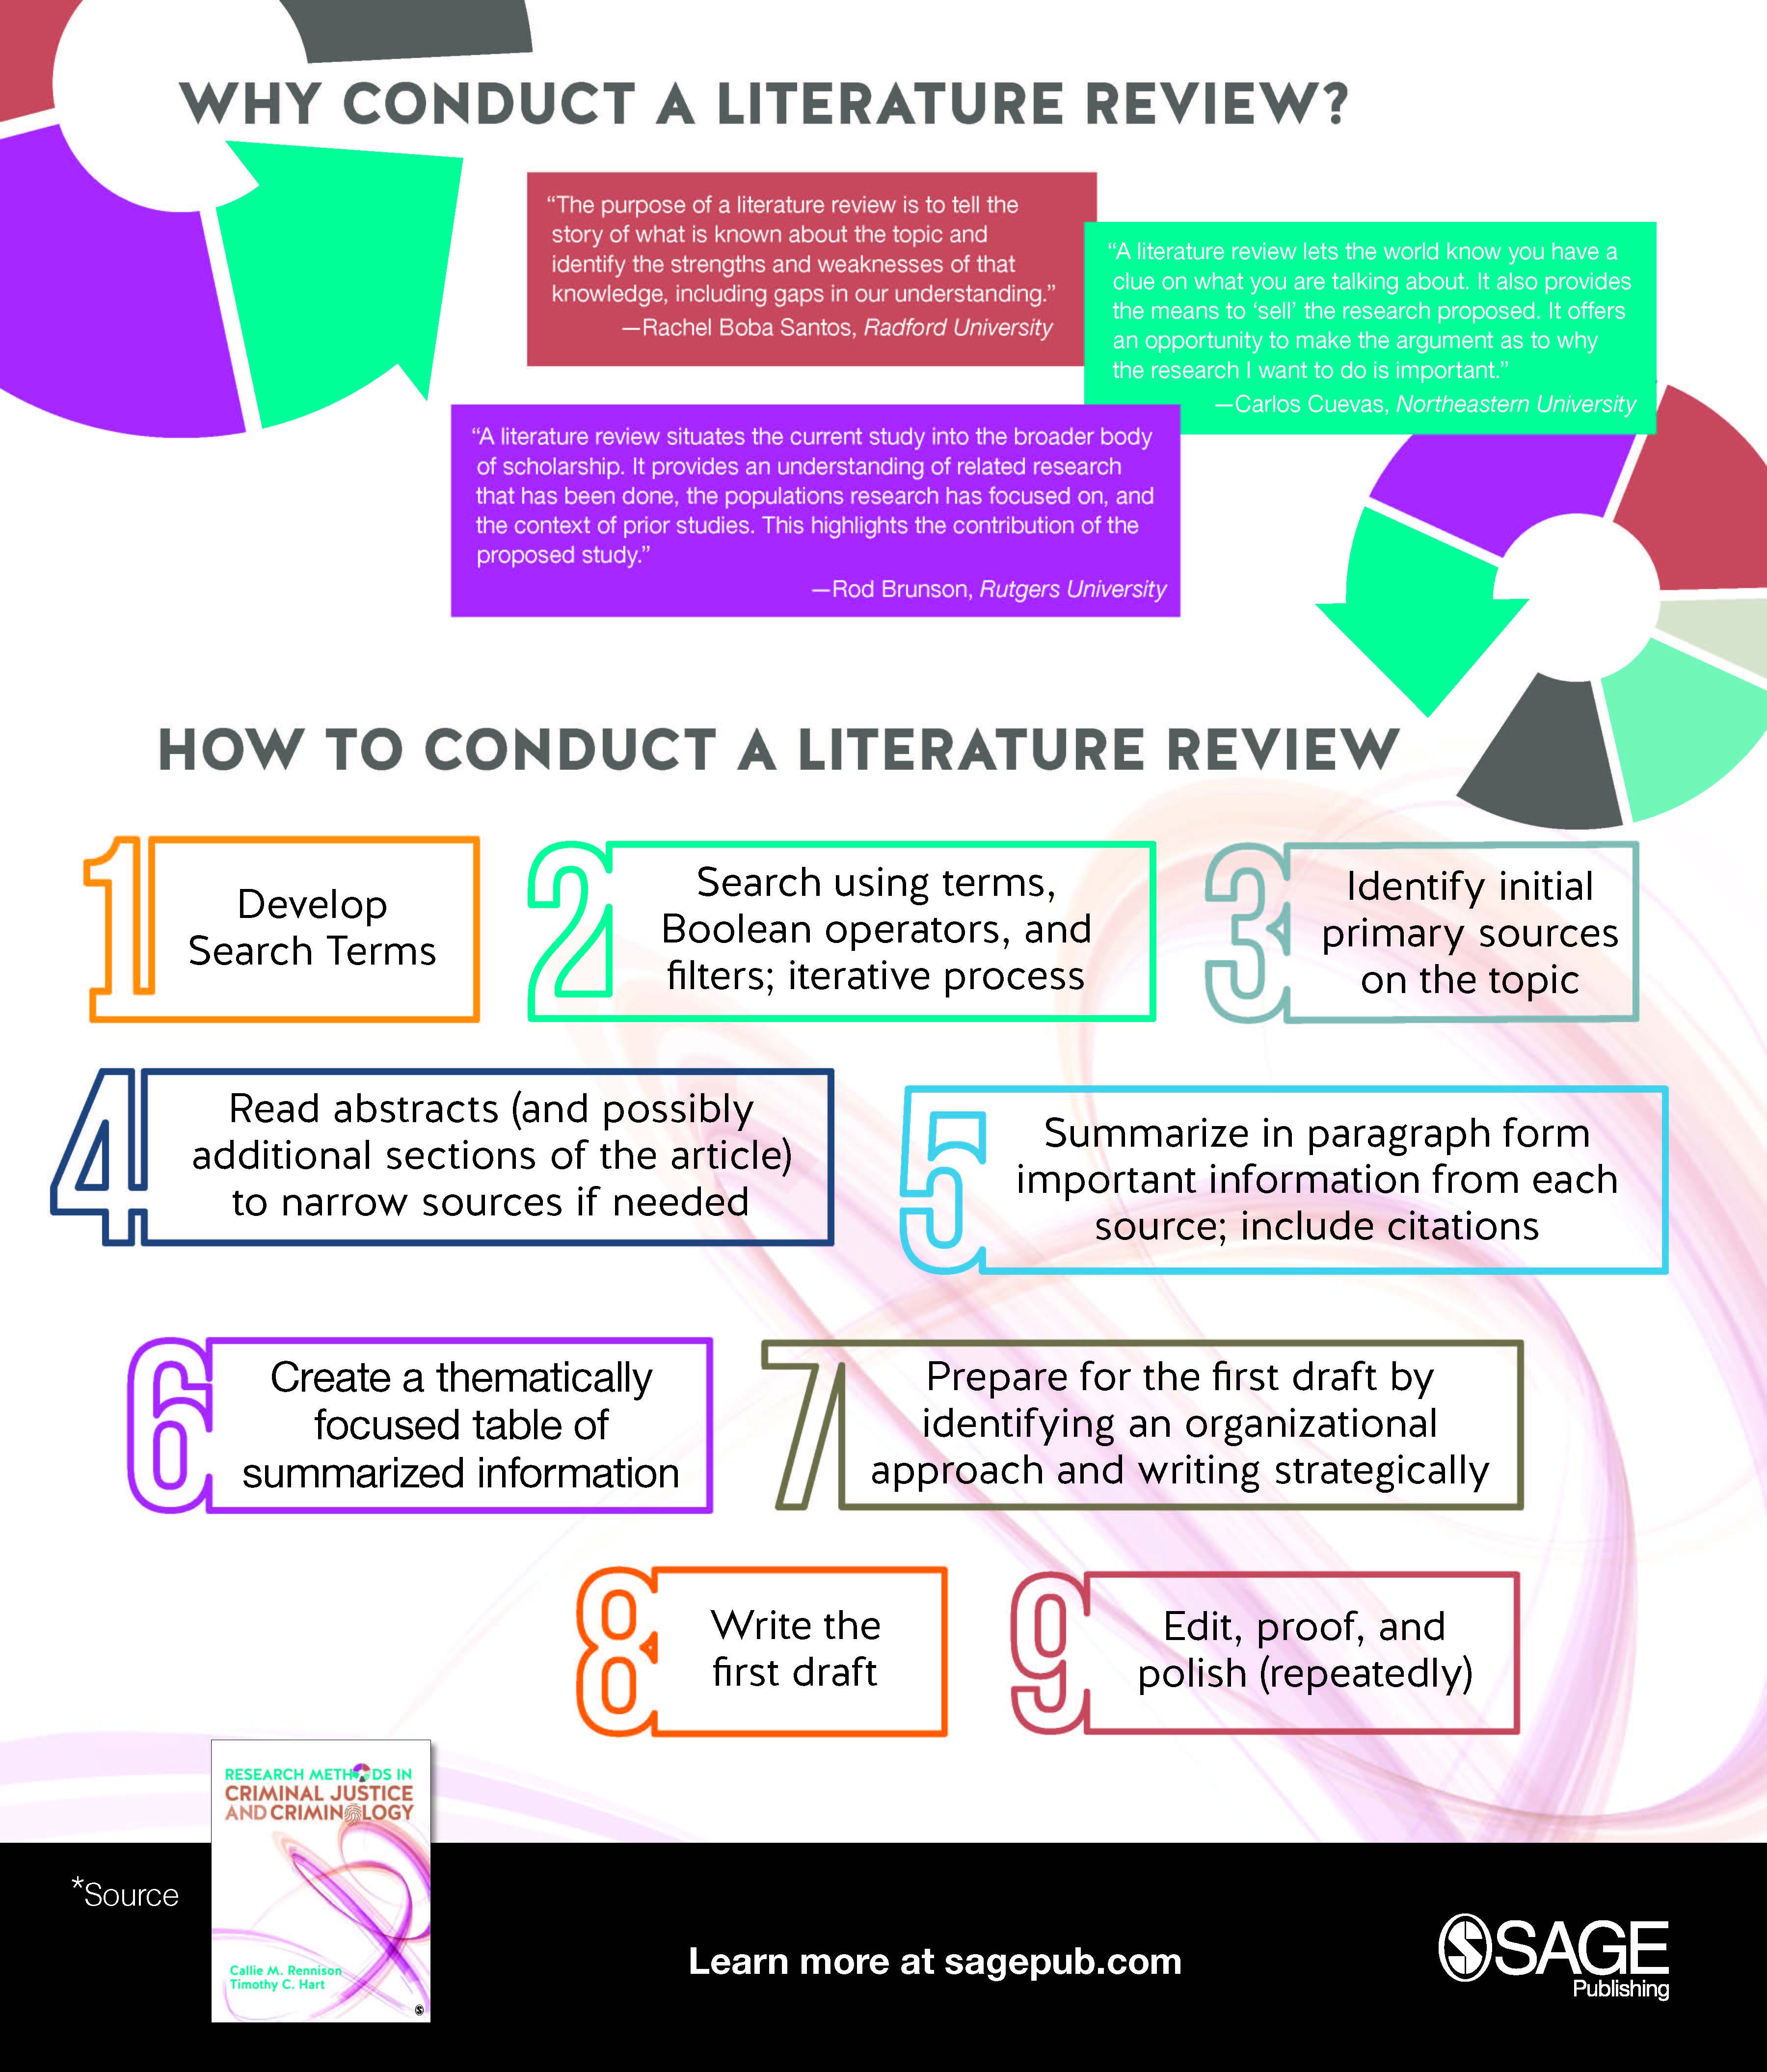 describe the 7 steps in conducting a literature review